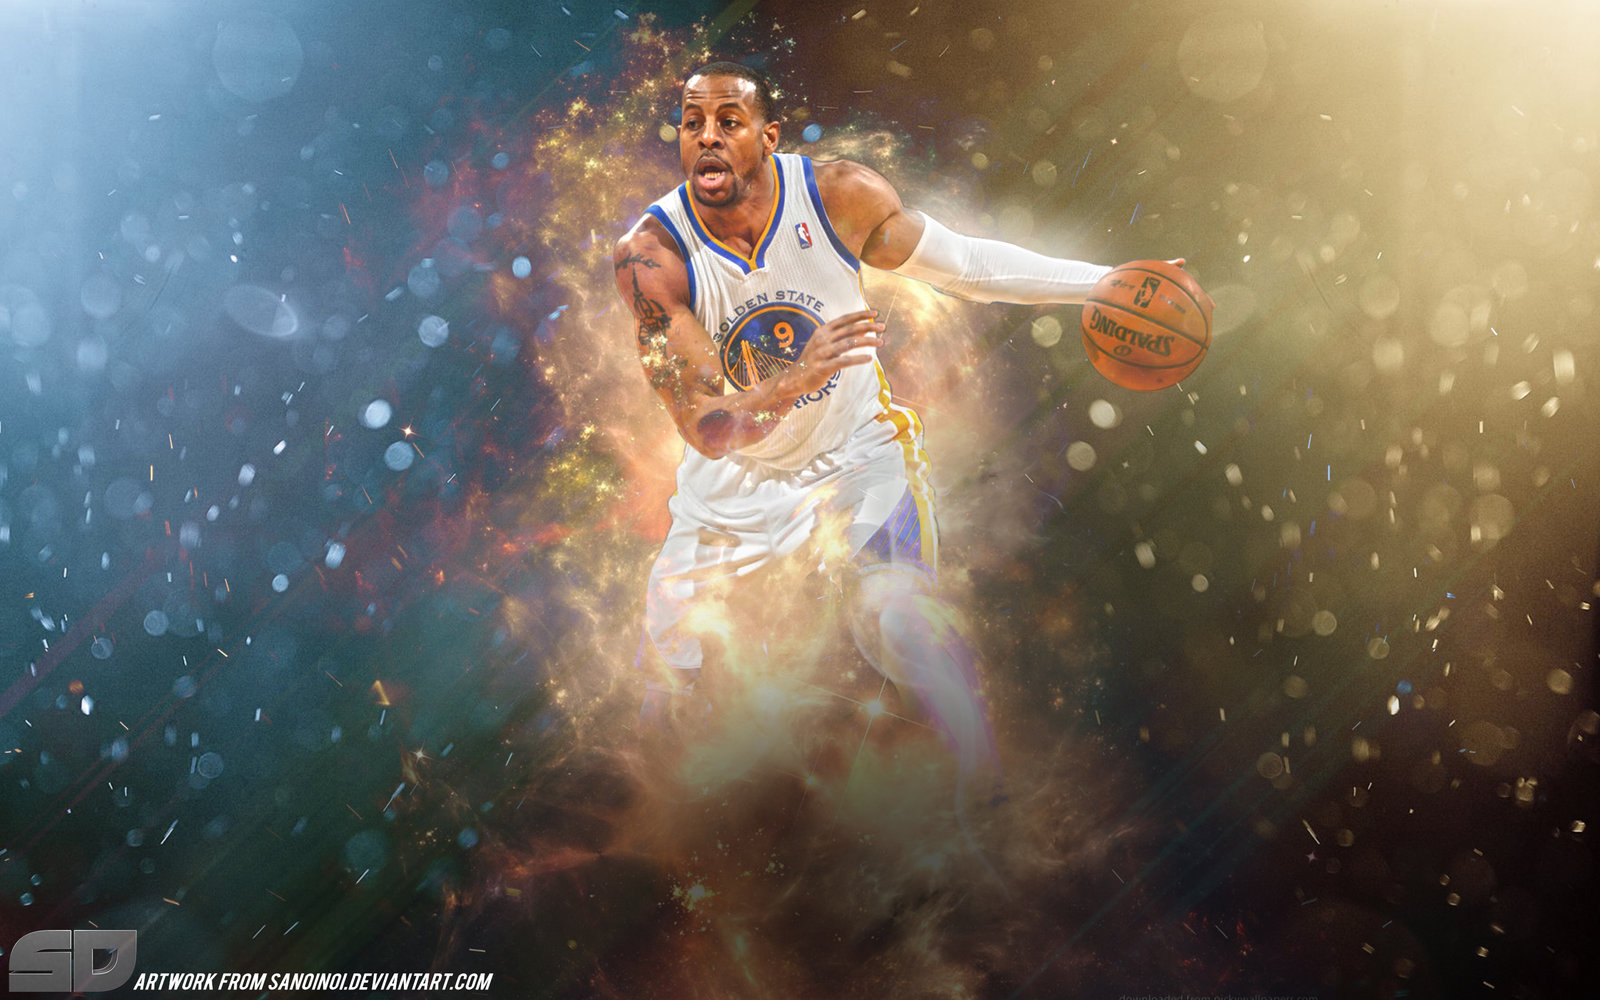 Andre Iguodala Wallpaper High Resolution And Quality